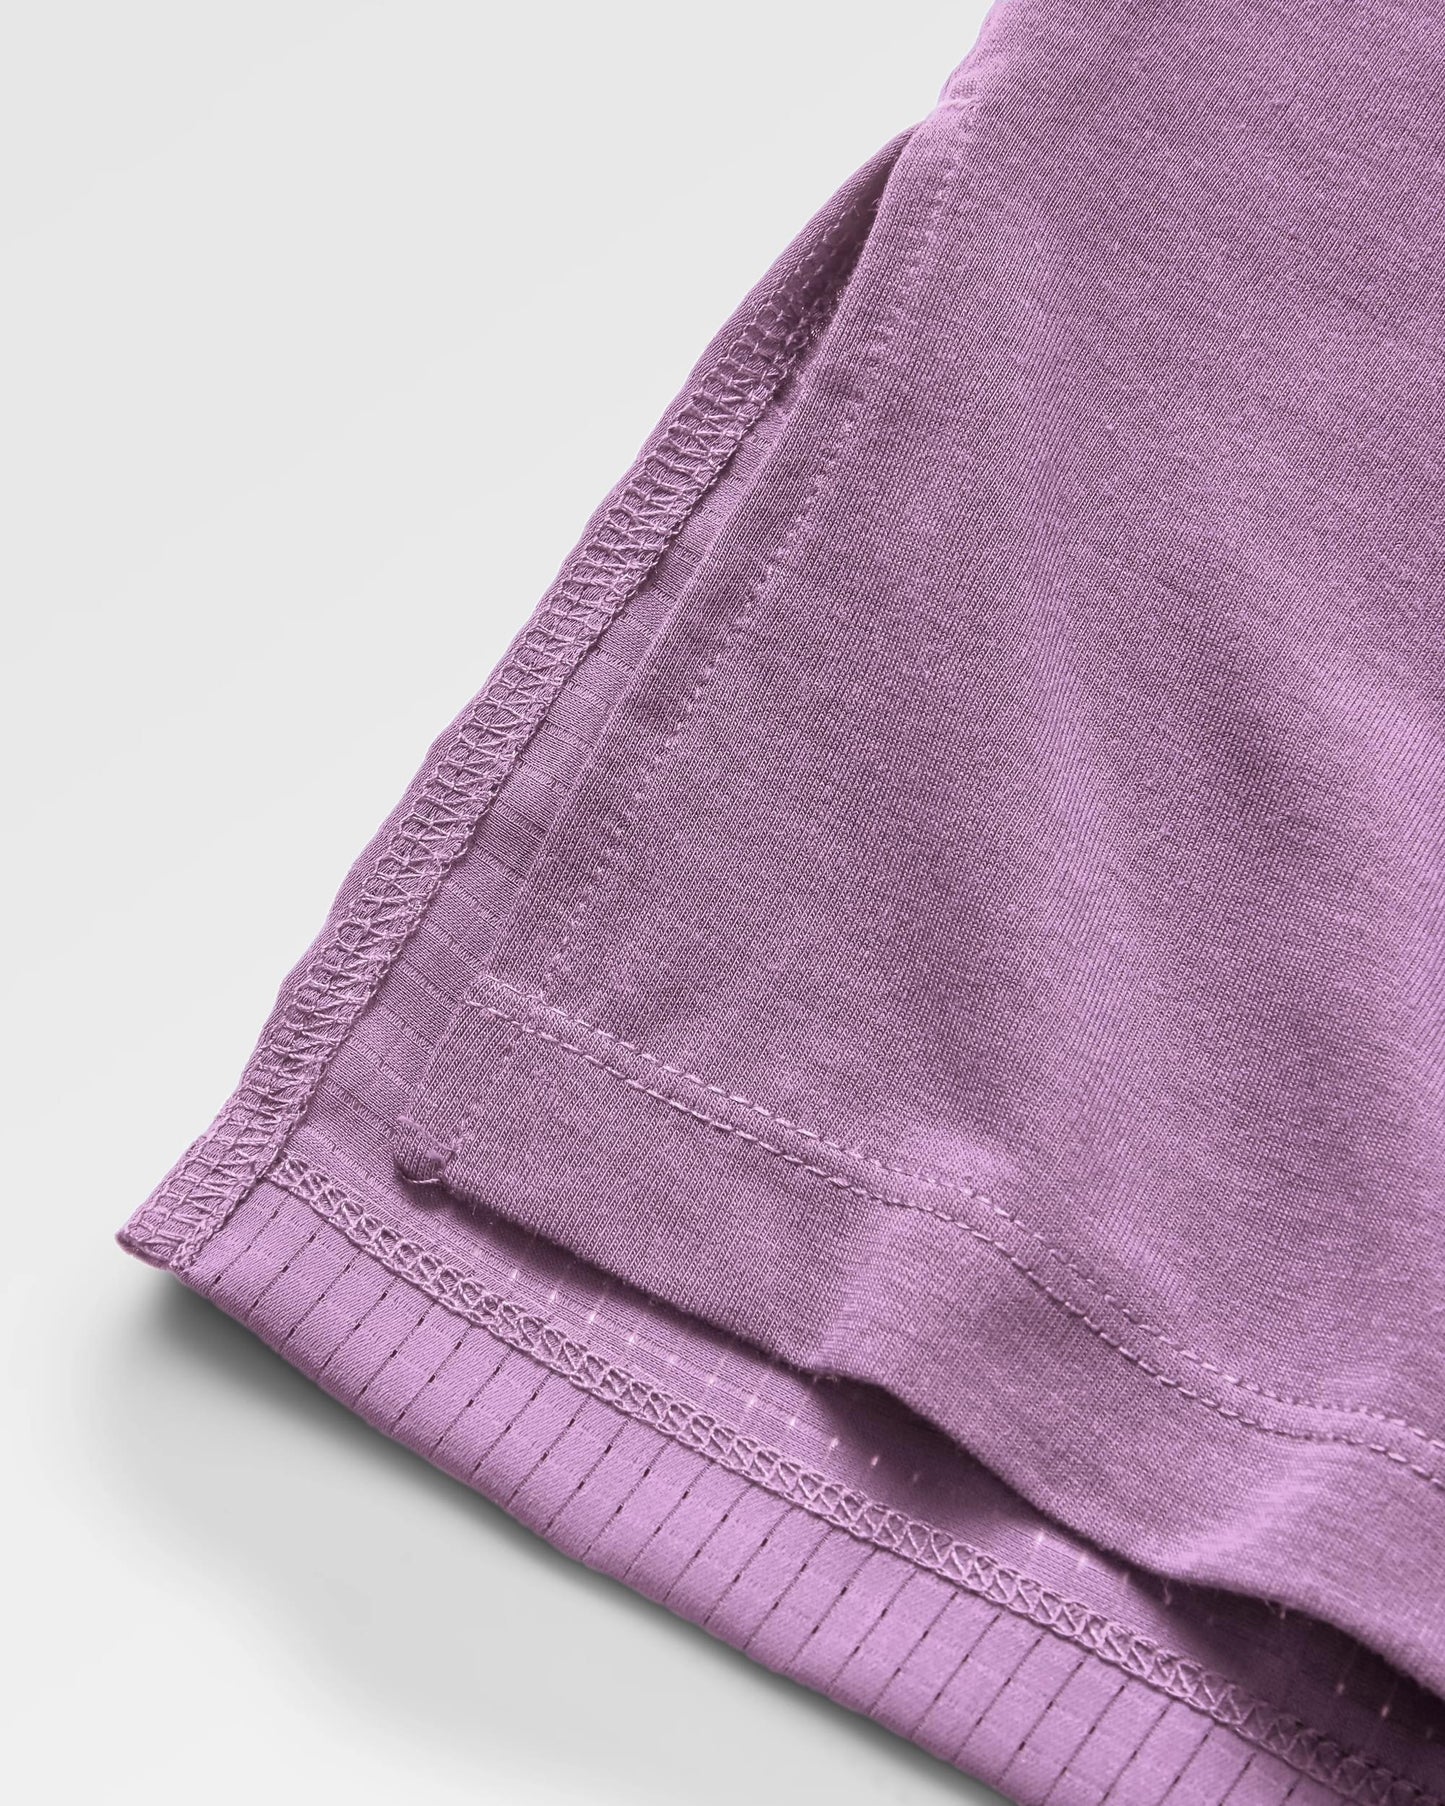 Lotus Recycled Active LS Top - Lilac